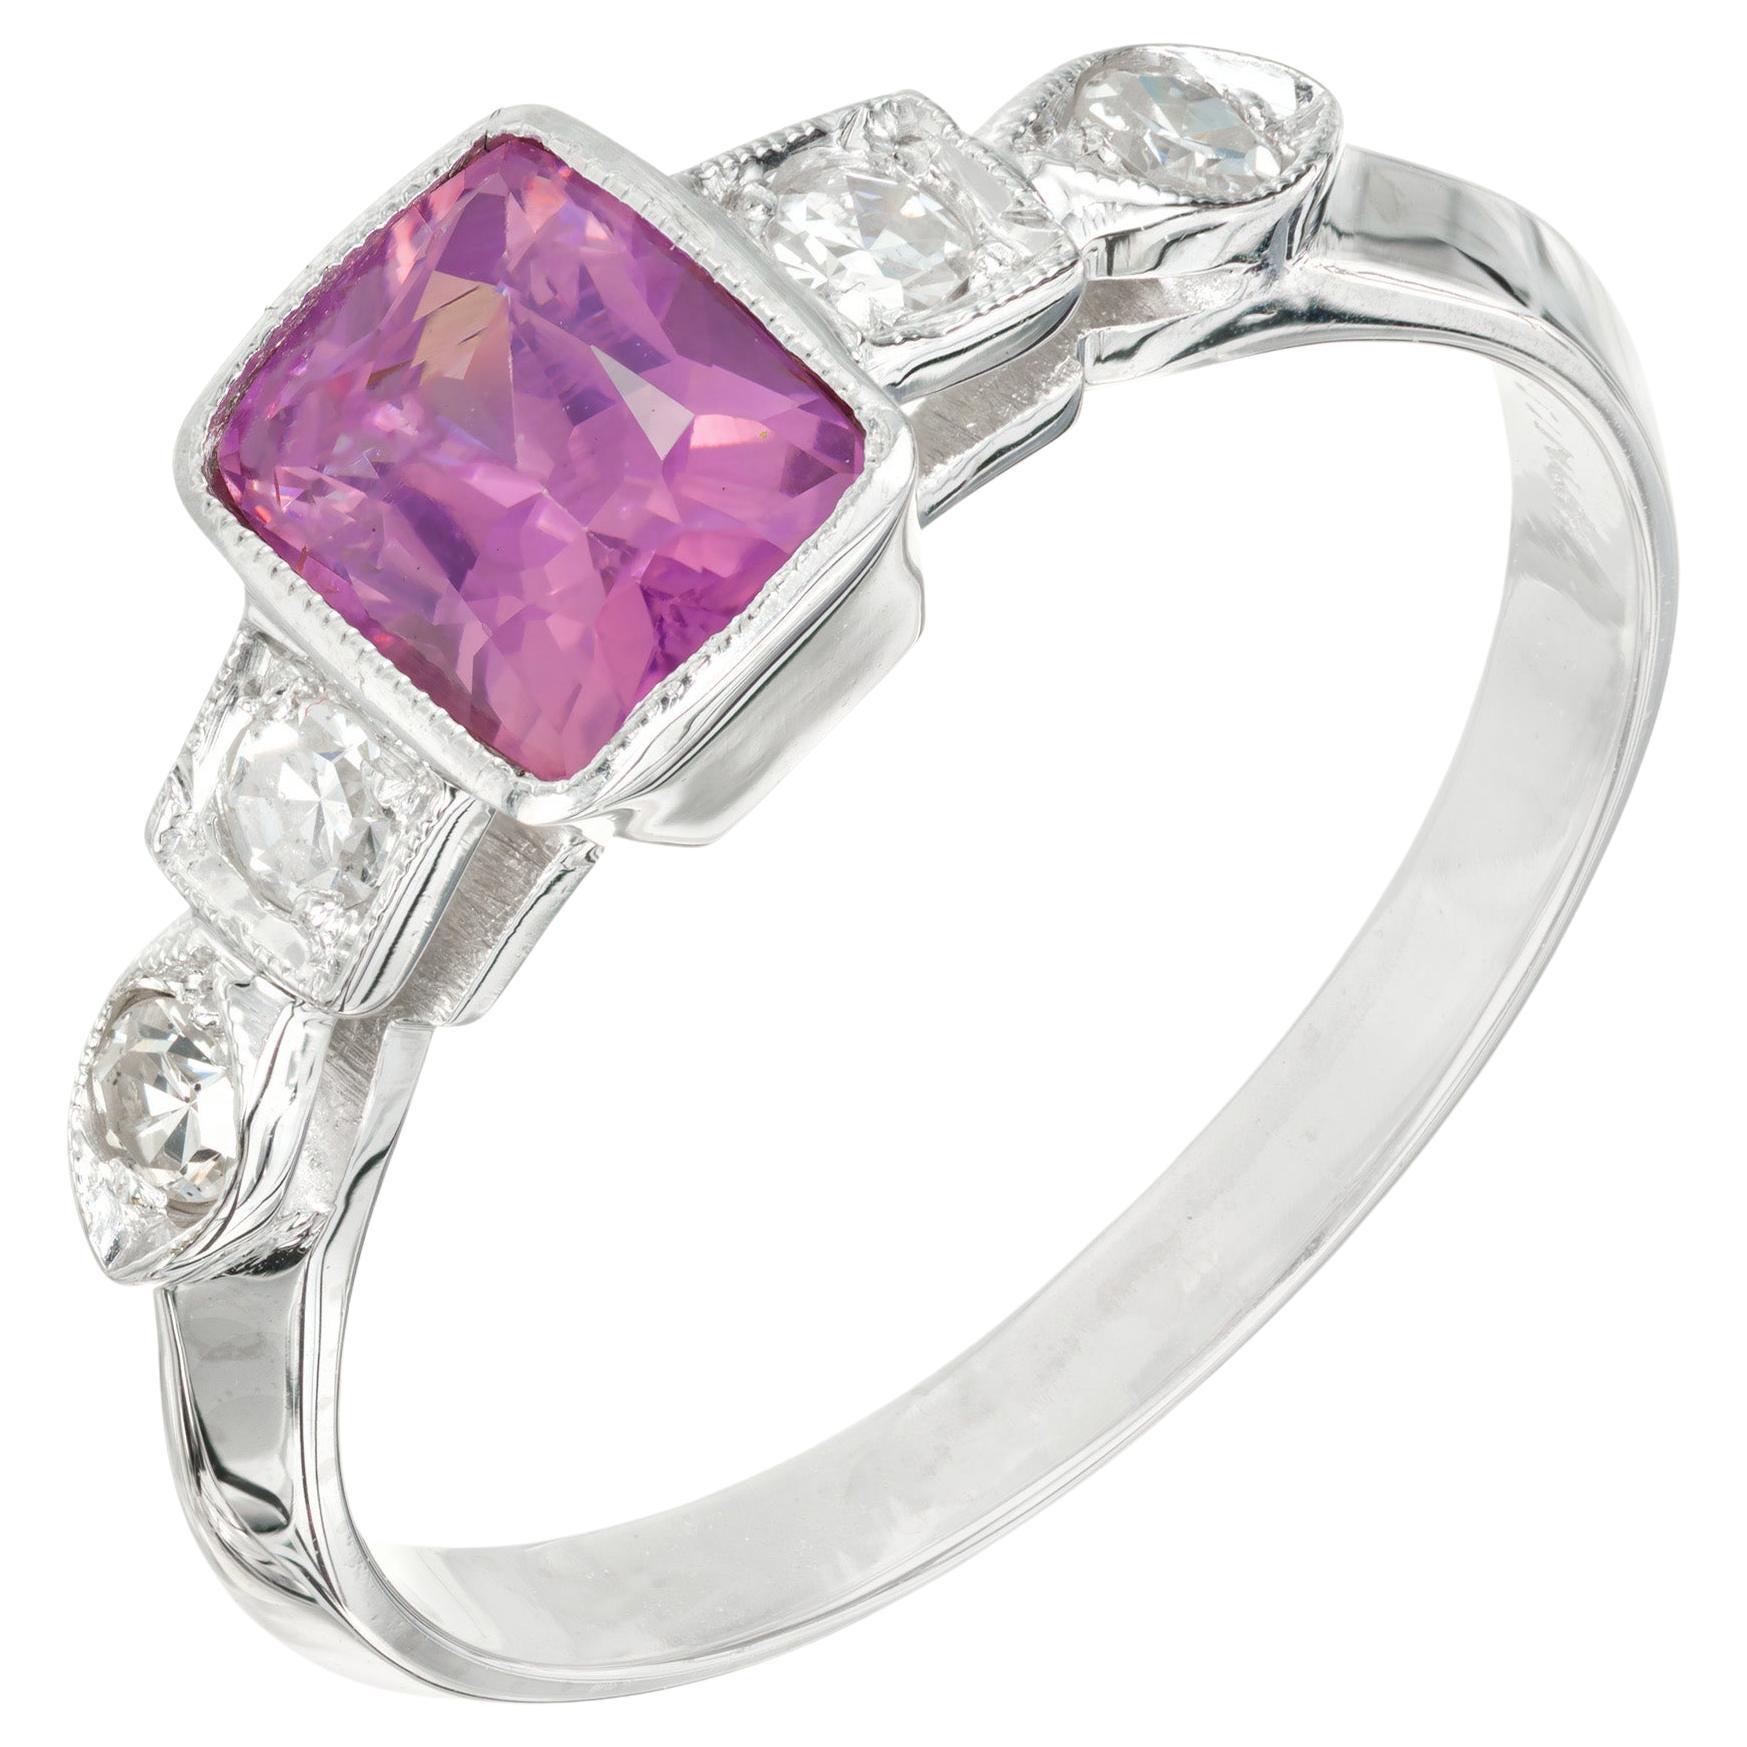 GIA Certified 1.02 Carat Pink Sapphire Diamond Art Deco Platinum Engagement Ring For Sale